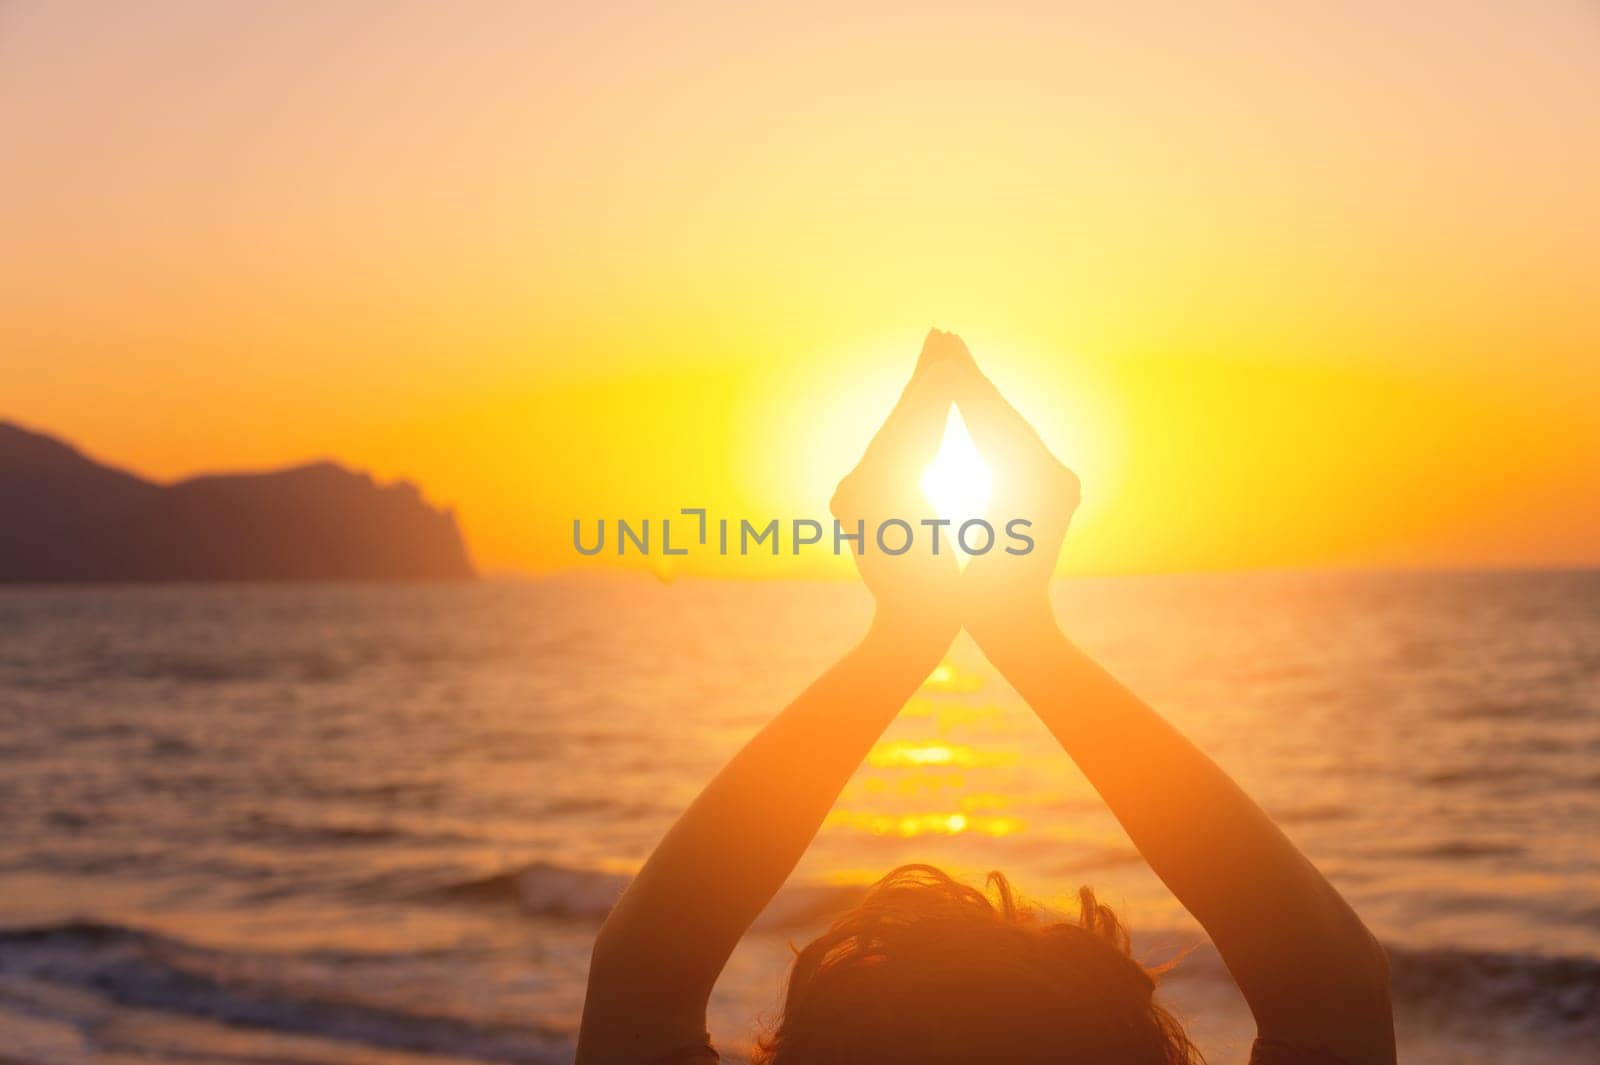 young woman raises her hands, praying in the light of sunset or sunrise. silhouette of female hands during sunset.